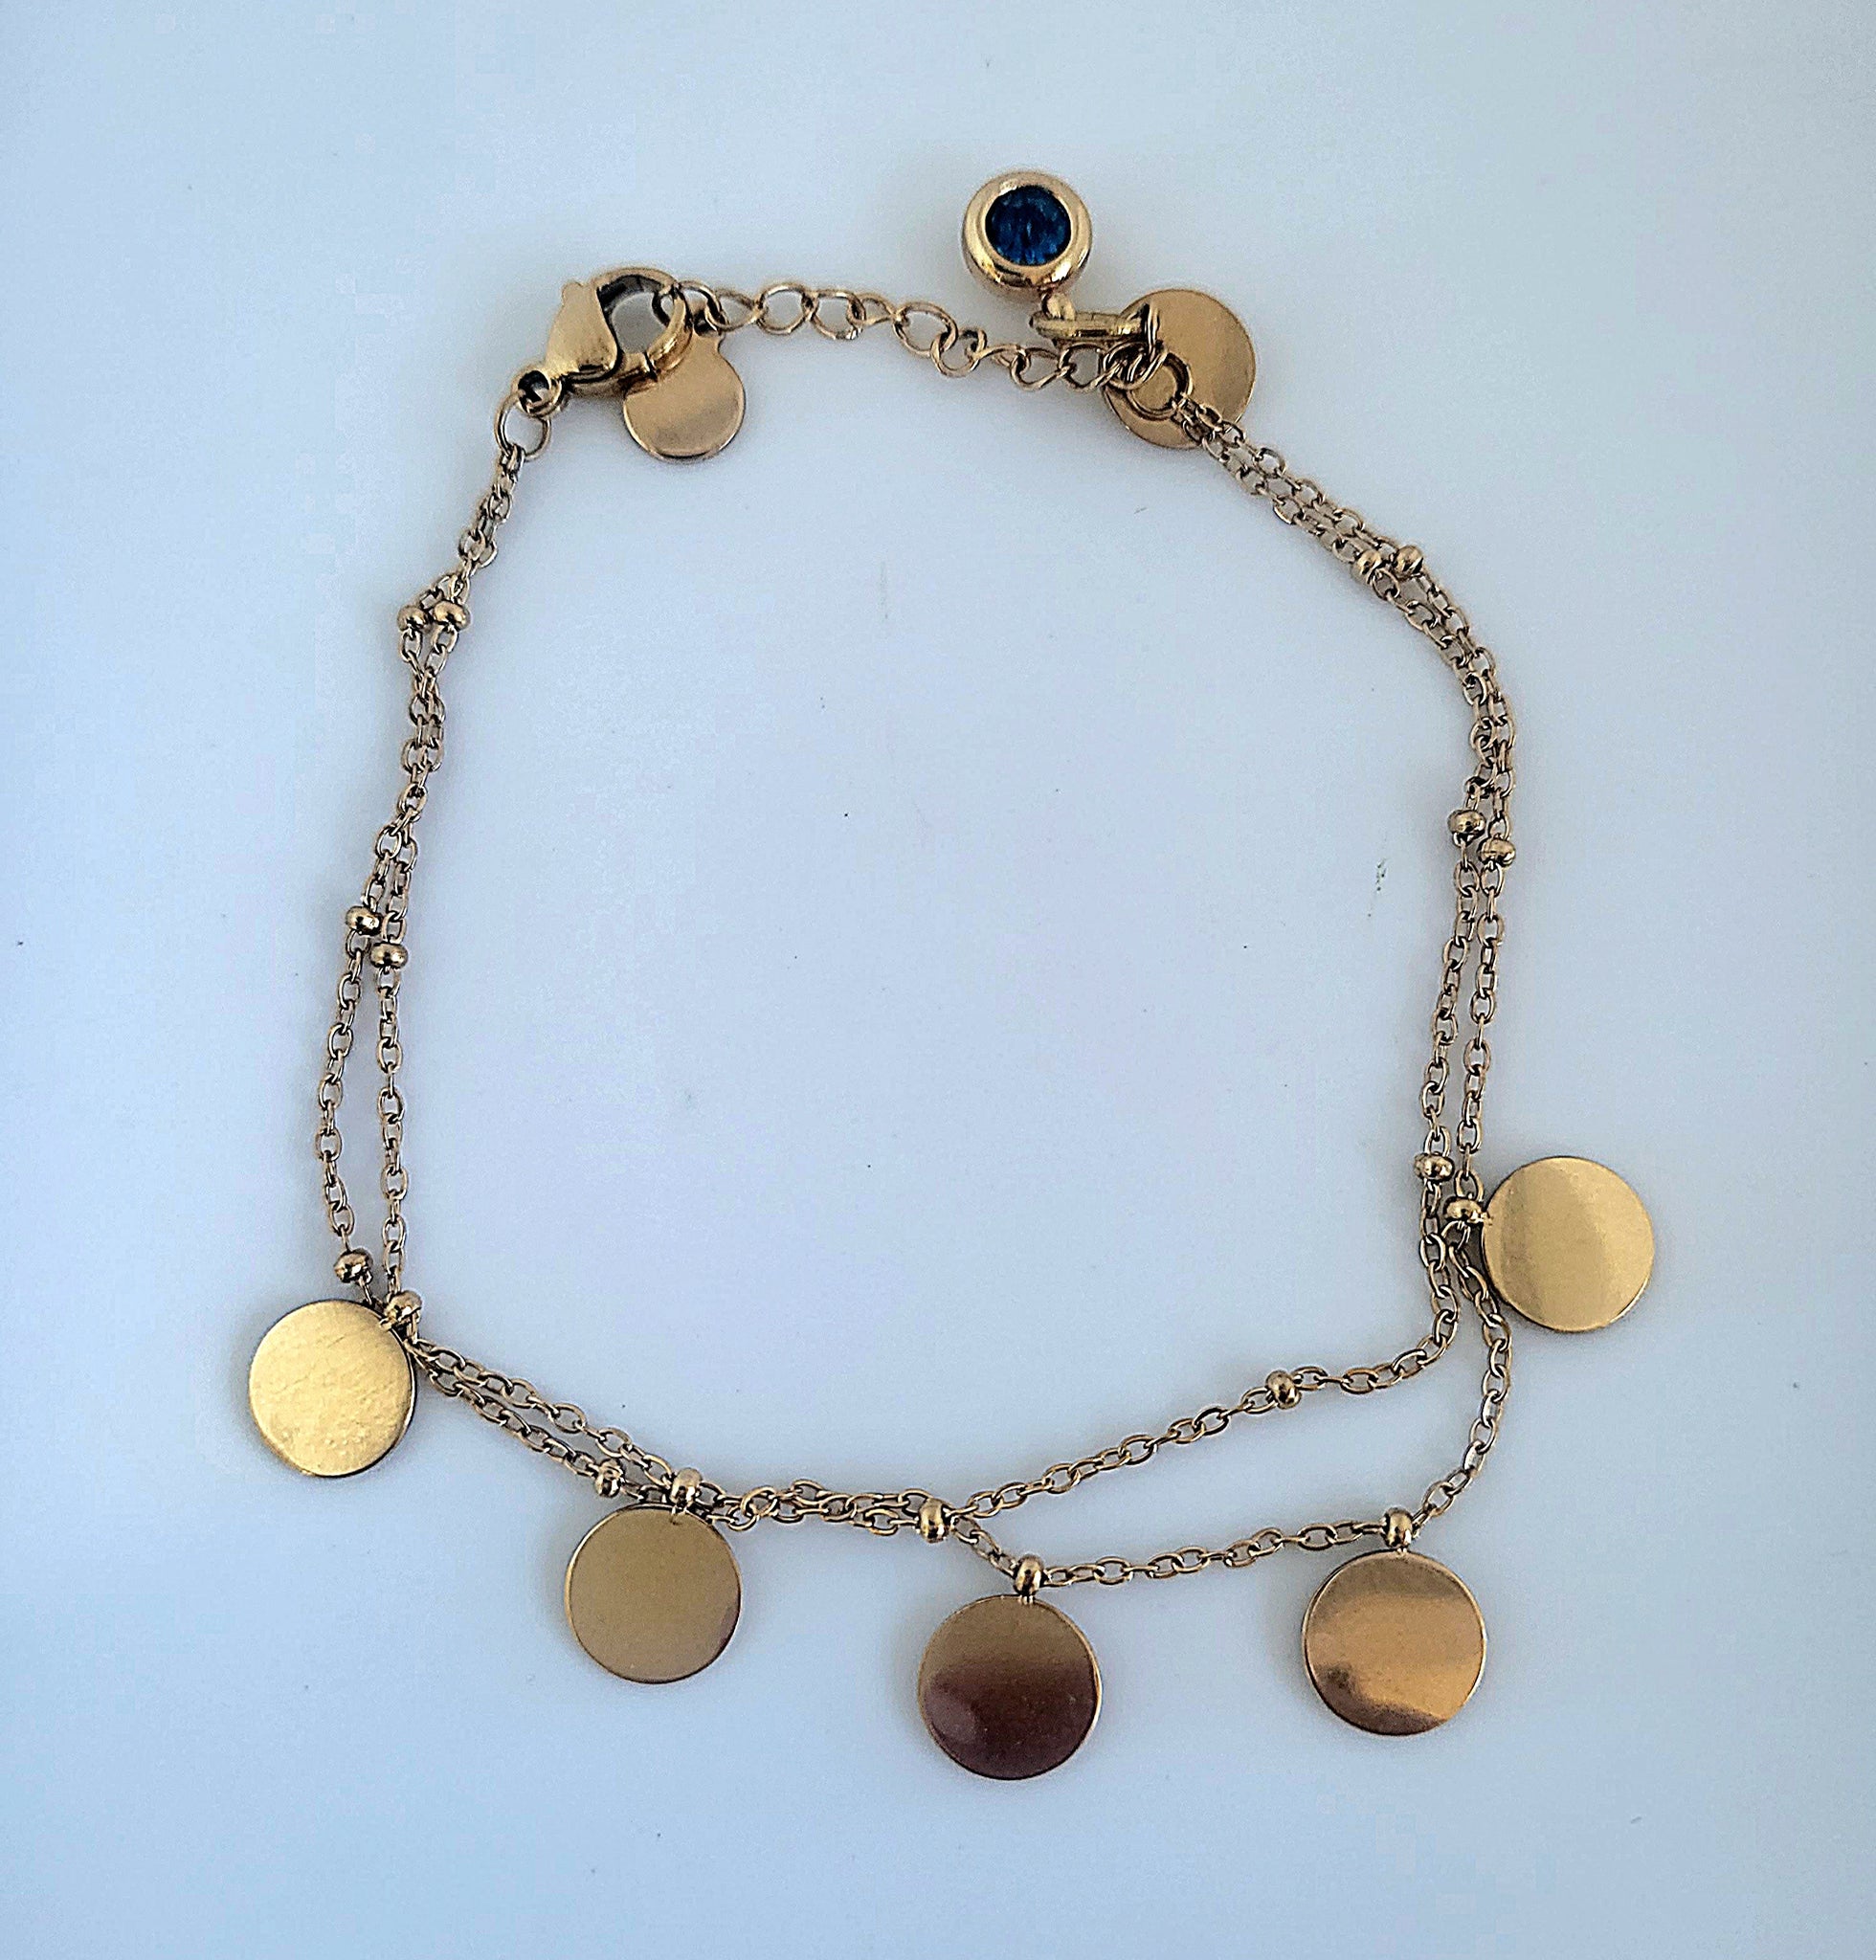 Bracelet with coins gold plated